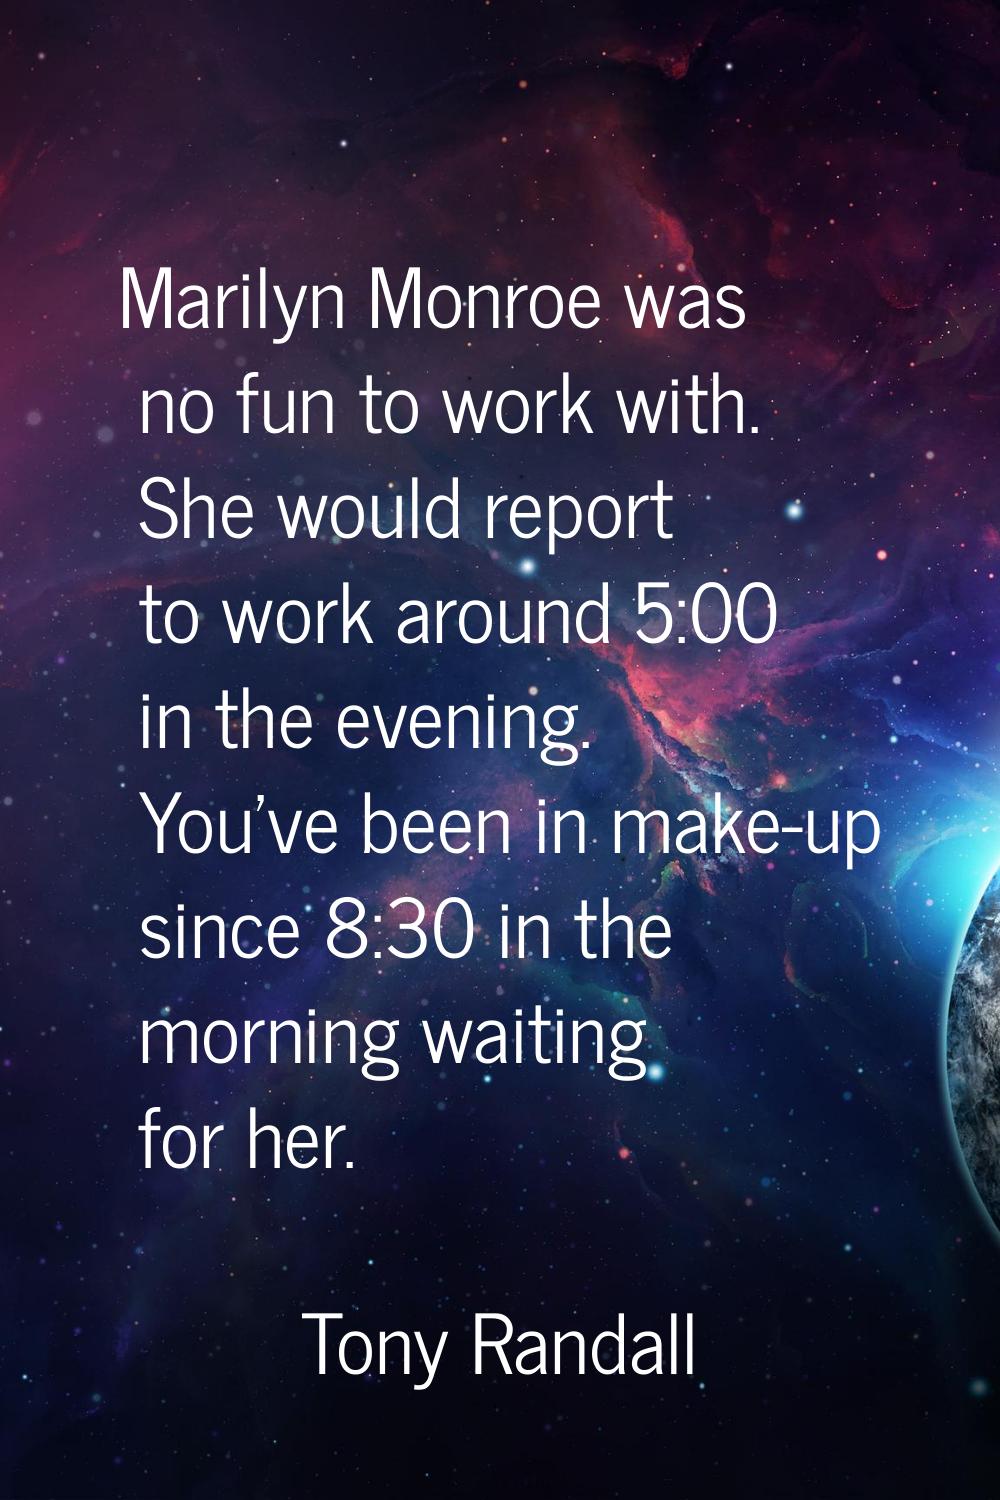 Marilyn Monroe was no fun to work with. She would report to work around 5:00 in the evening. You've